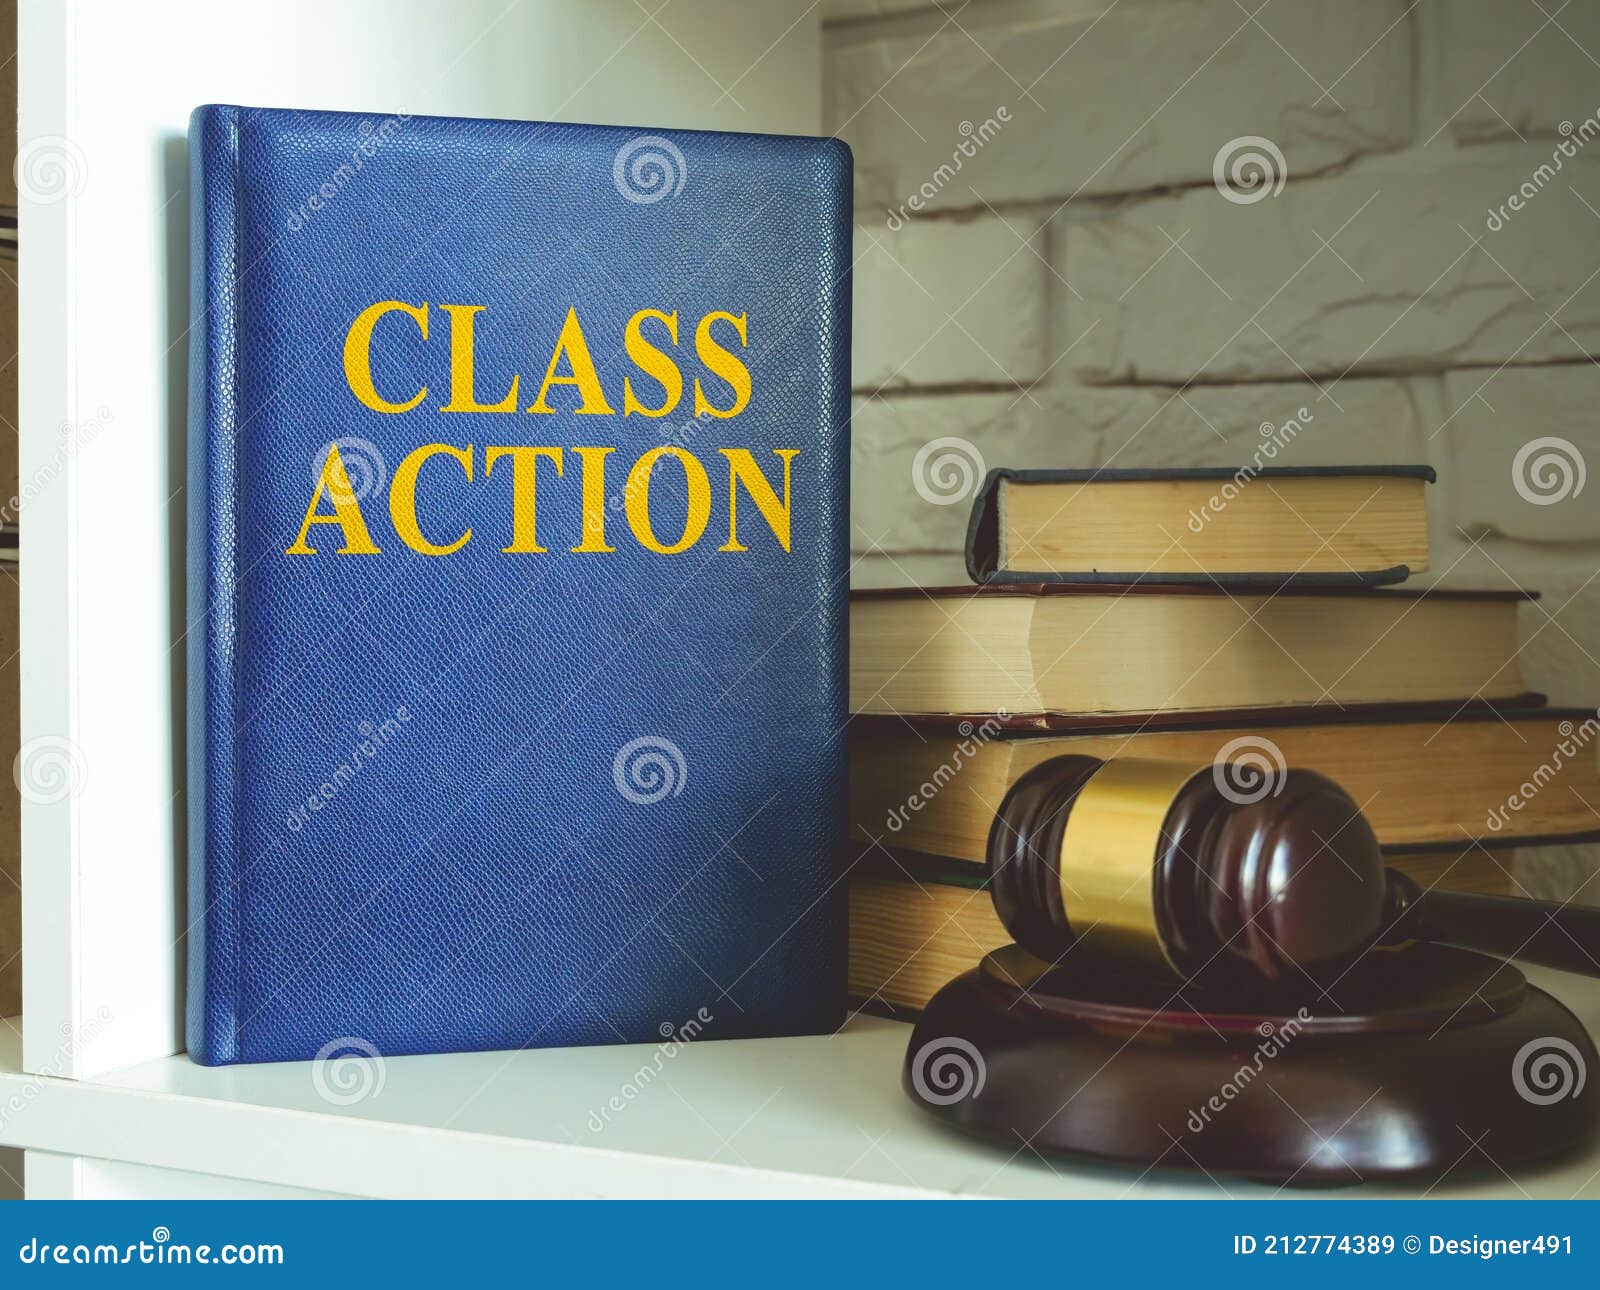 book about class action lawsuit on shelf.